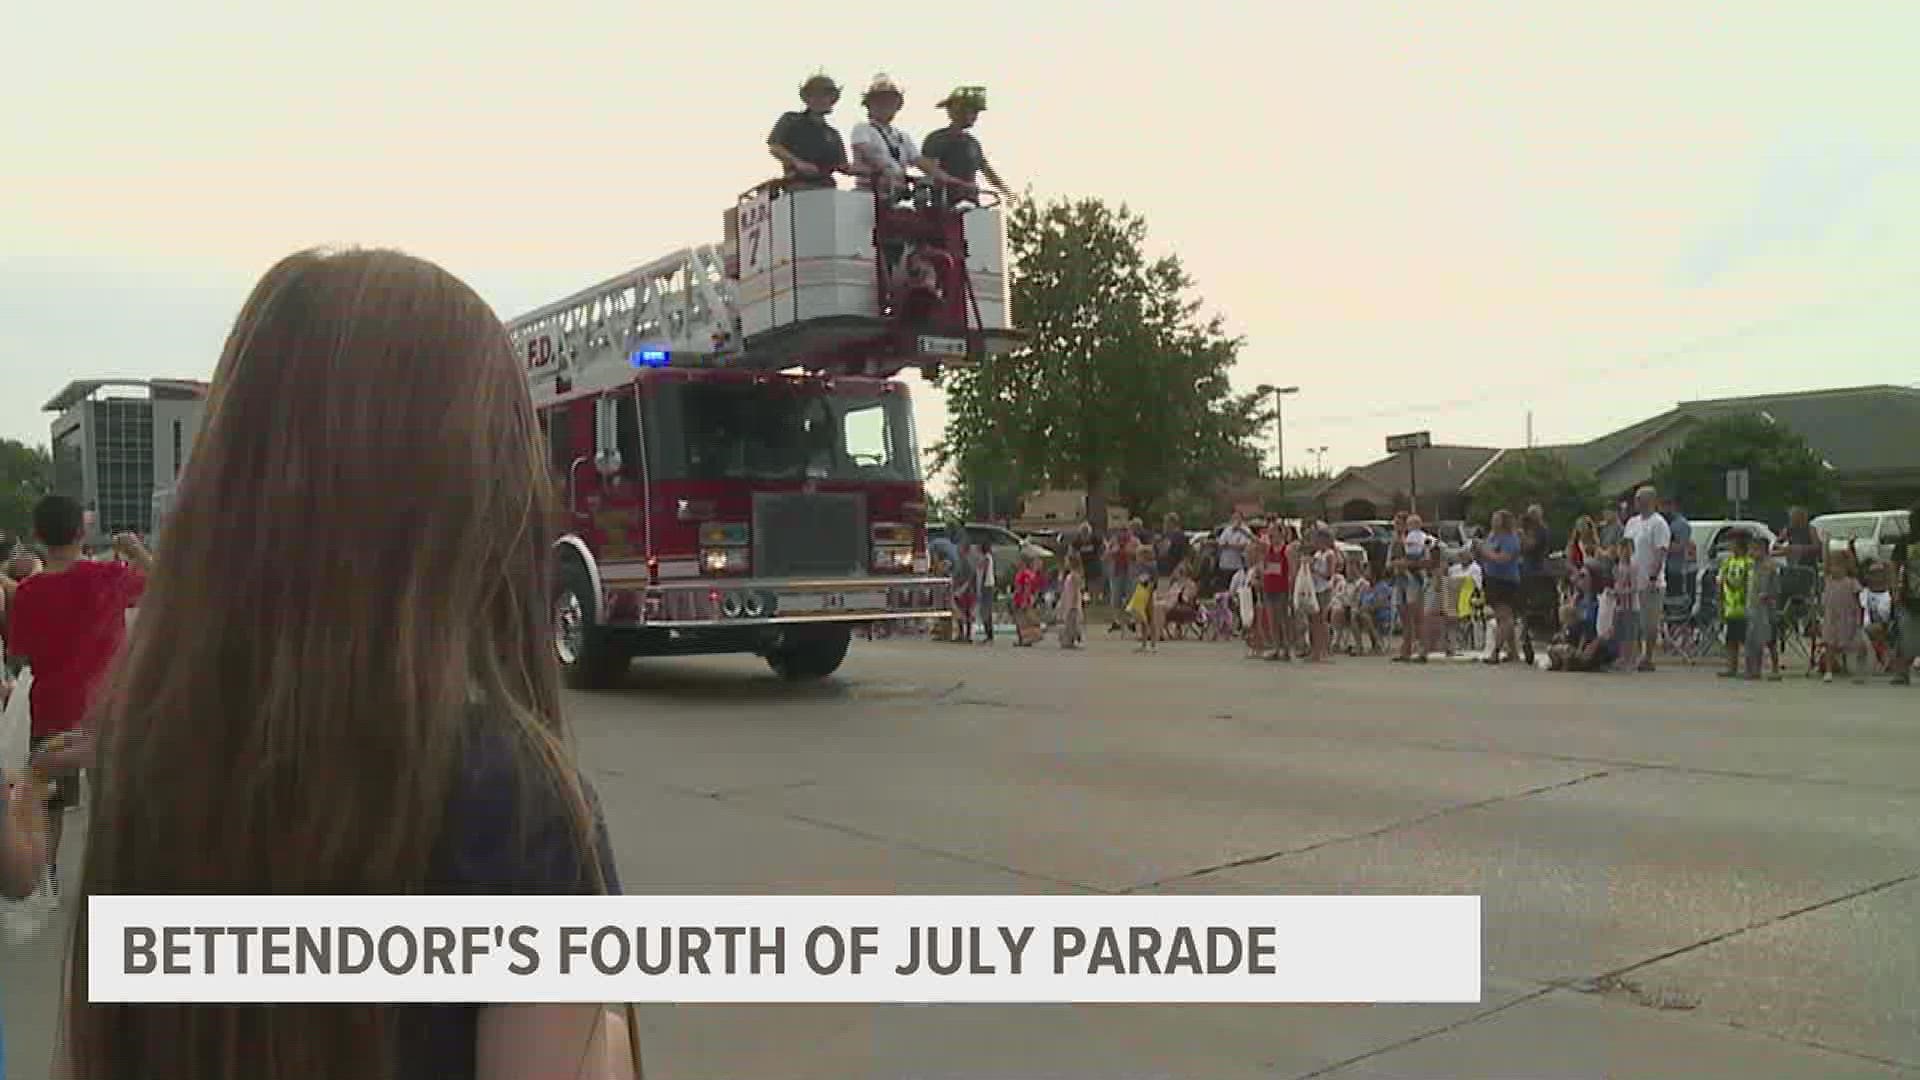 Thousands turn out for Bettendorf's Fourth of July parade